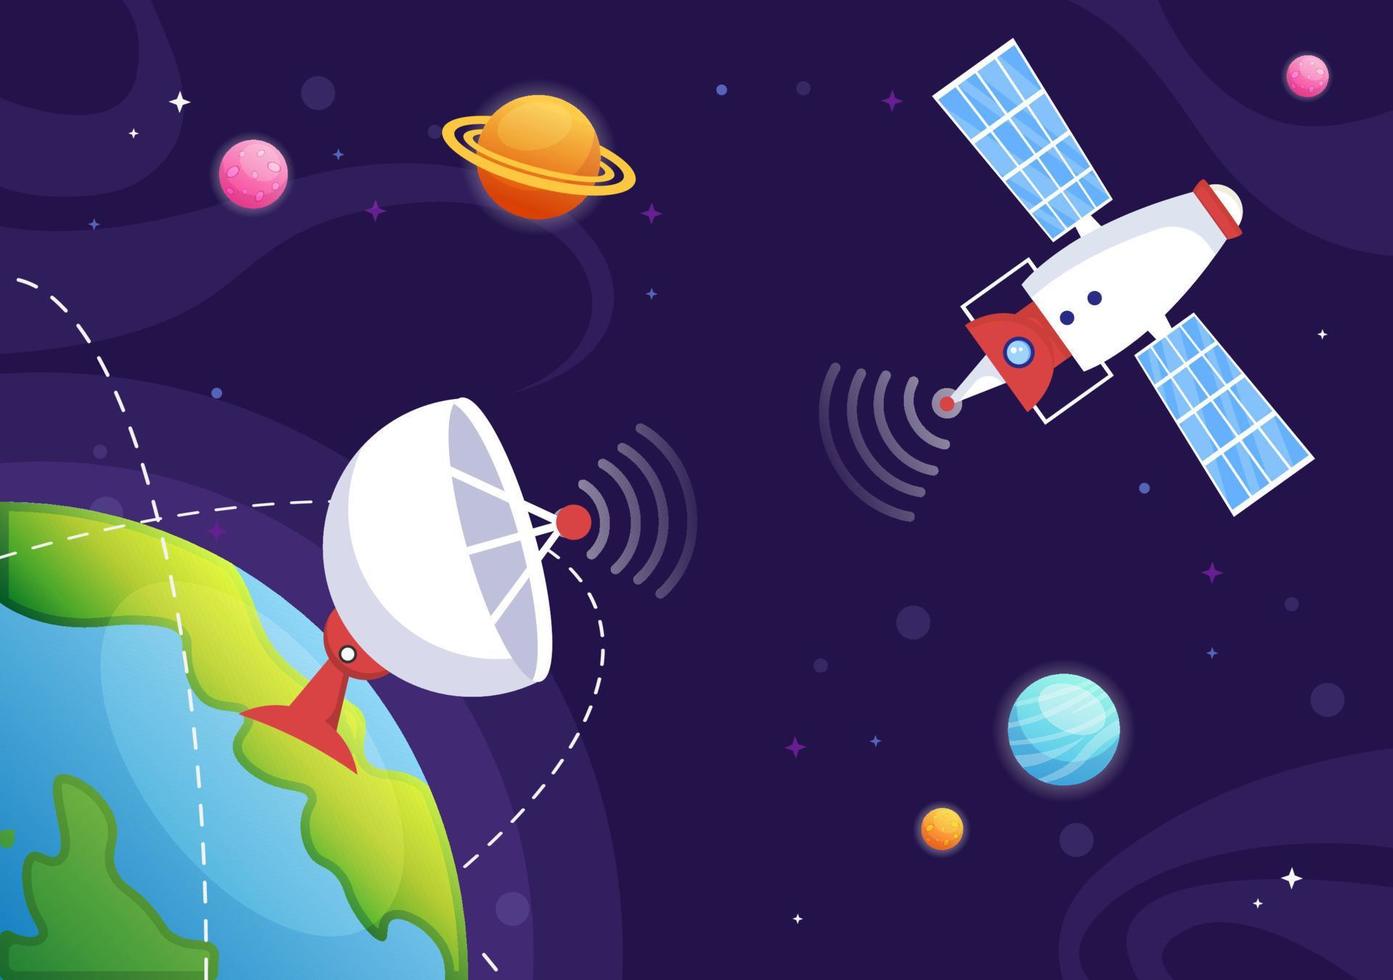 Artificial Satellites Orbiting the Planet Earth with Wireless Technology Global 5G Internet Network Satellite Communication in Flat Background Illustration vector